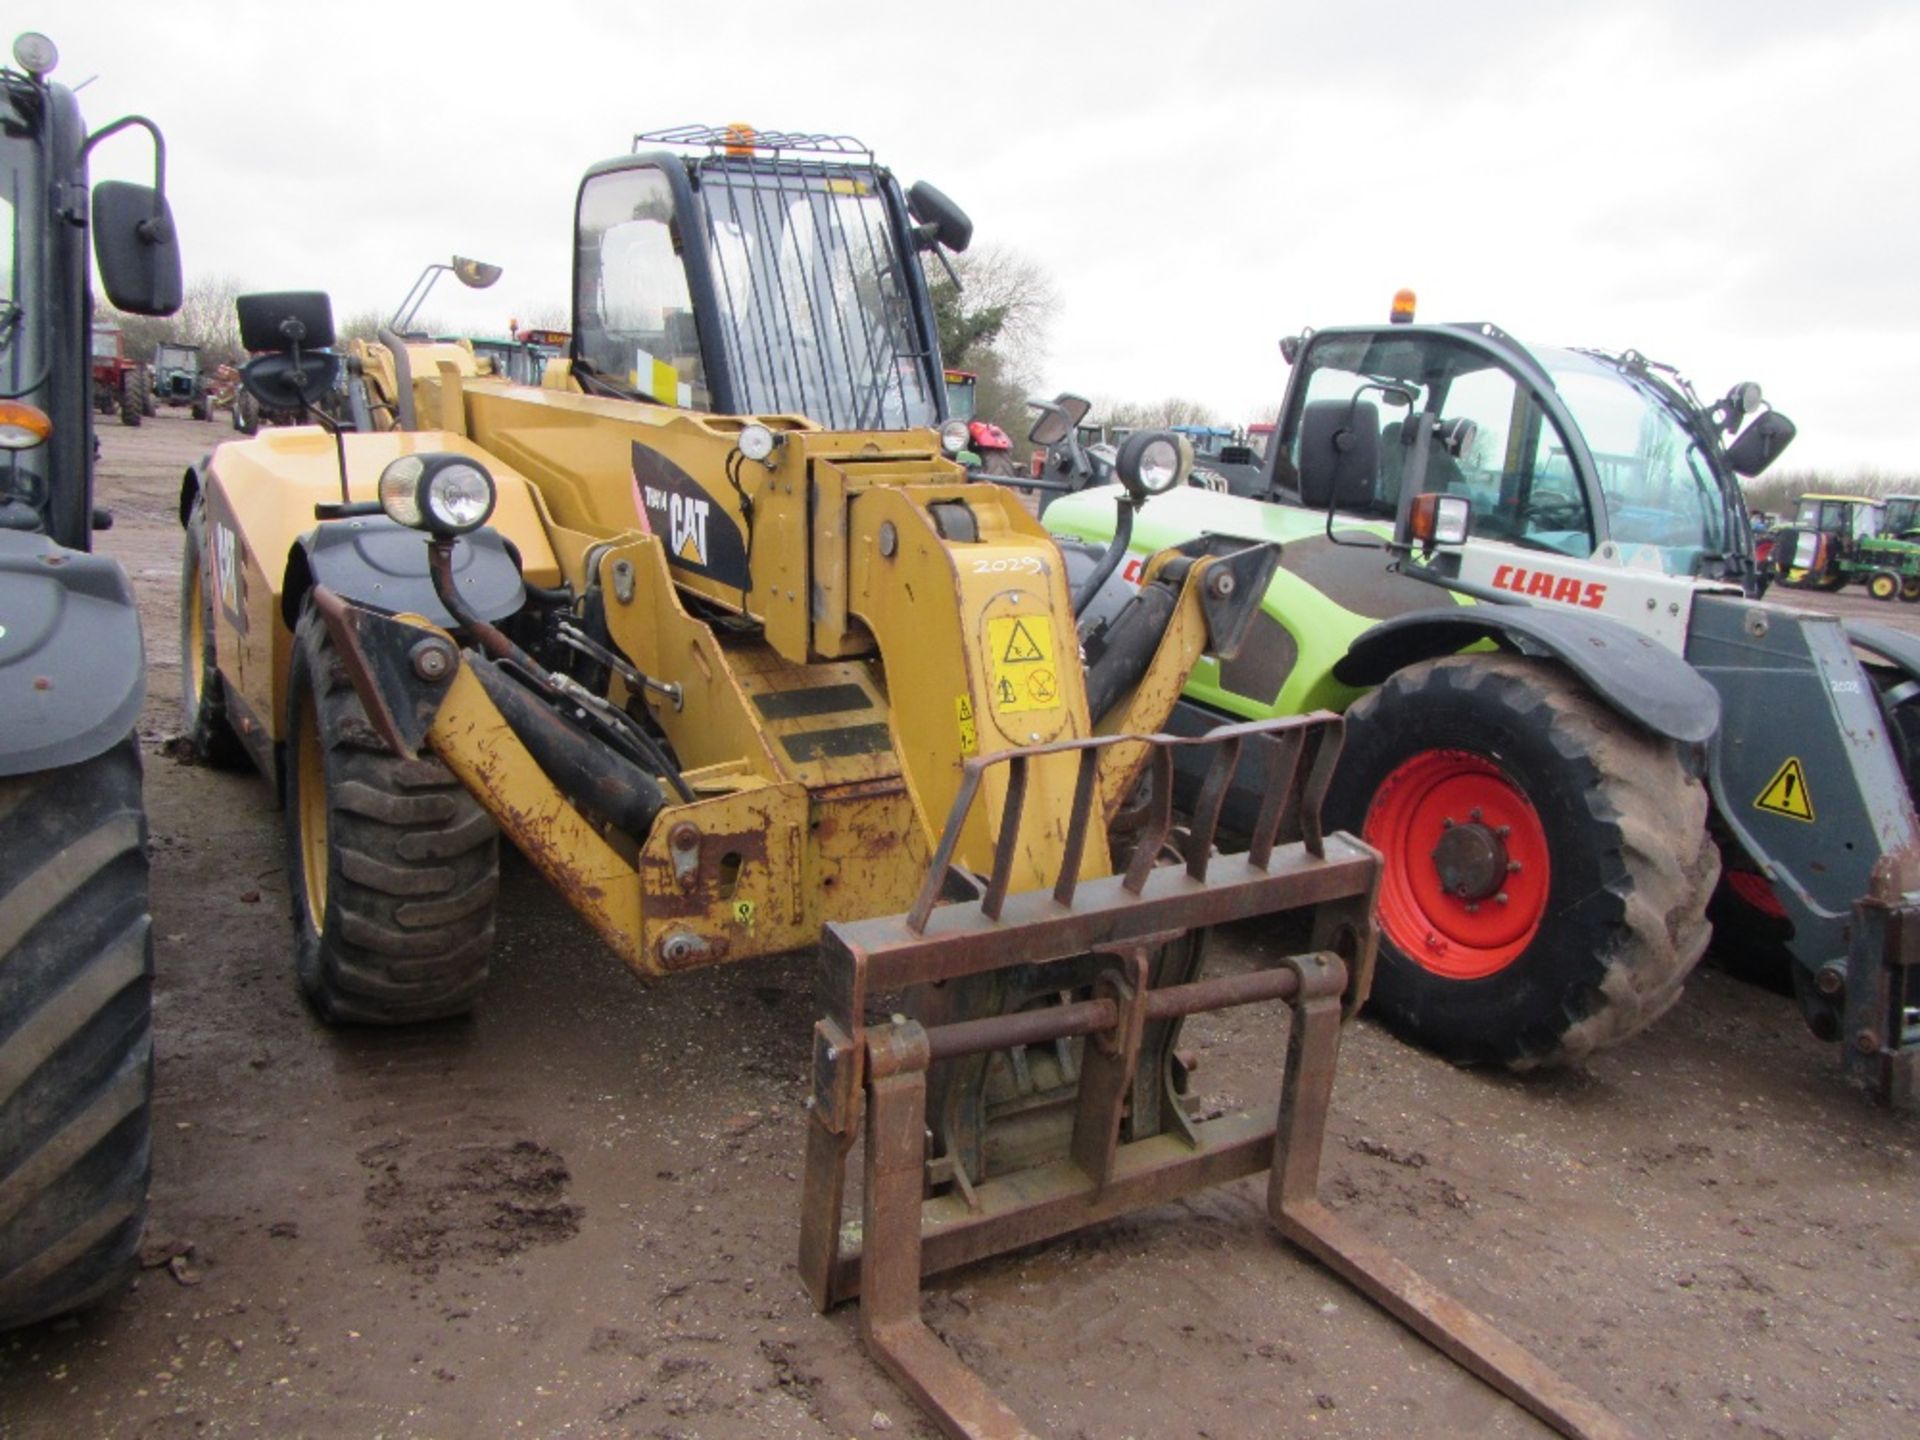 Caterpillar TH141 14m Telehandler c/w new set of switches in office Approx 4075 Hrs Ser. No. - Image 2 of 5